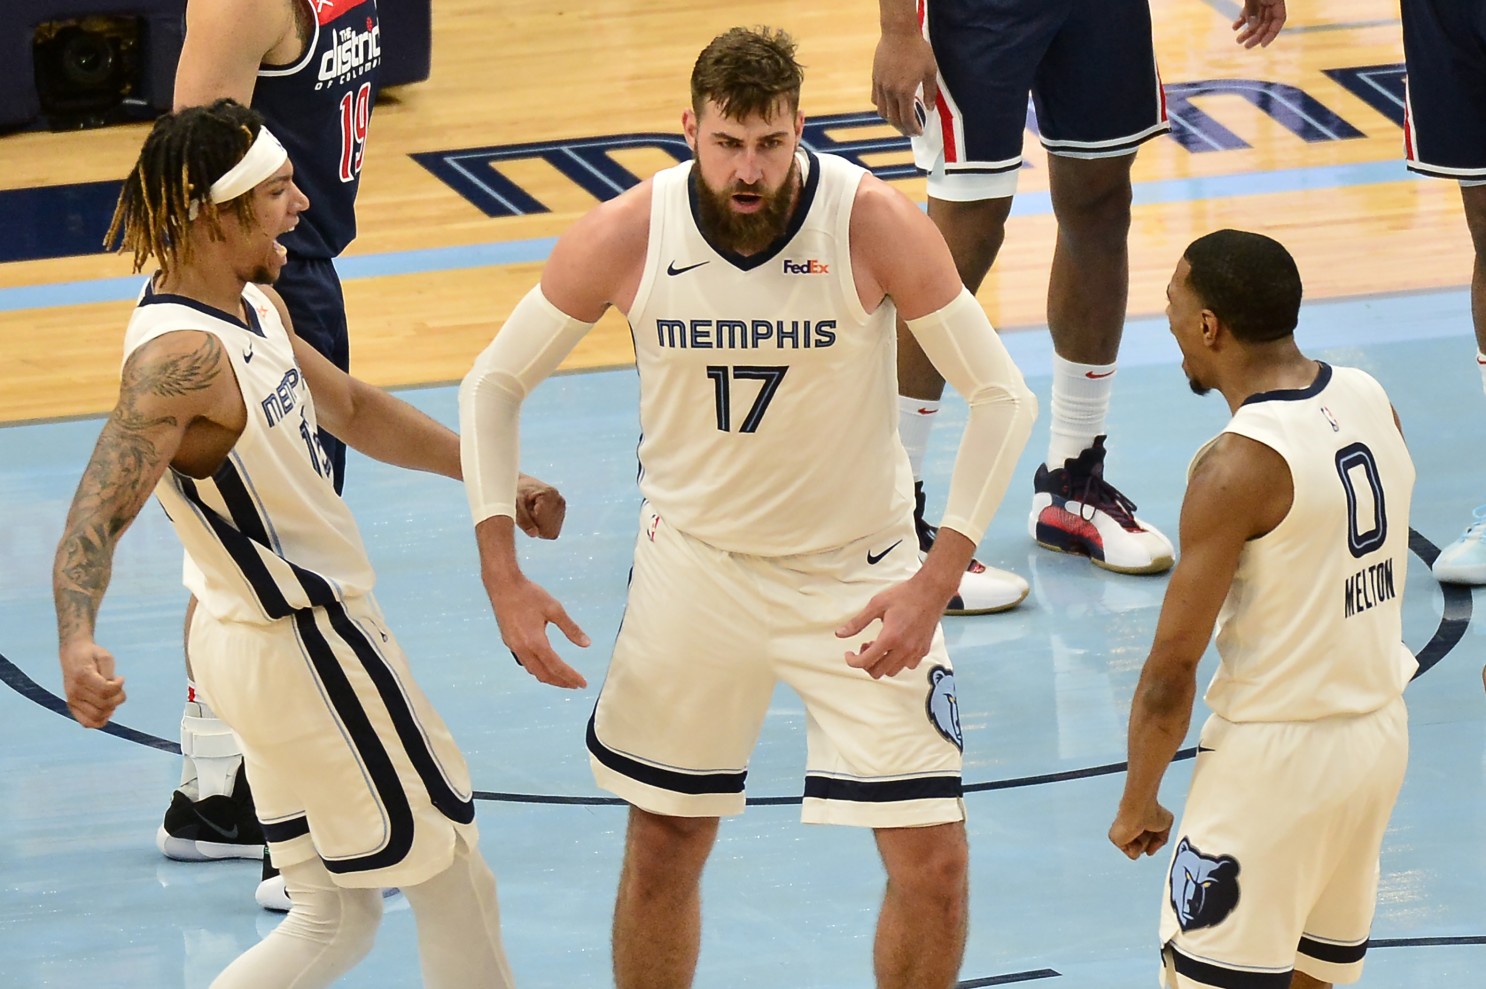 Memphis Grizzlies center Jonas Valanciunas (17) reacts with teammates Brandon Clarke (15) and De’Anthony Melton (0) after scoring in the second half of an NBA basketball game against the Washington Wizards Wednesday, March 10, 2021, in Memphis, Tenn. (AP Photo/Brandon Dill)